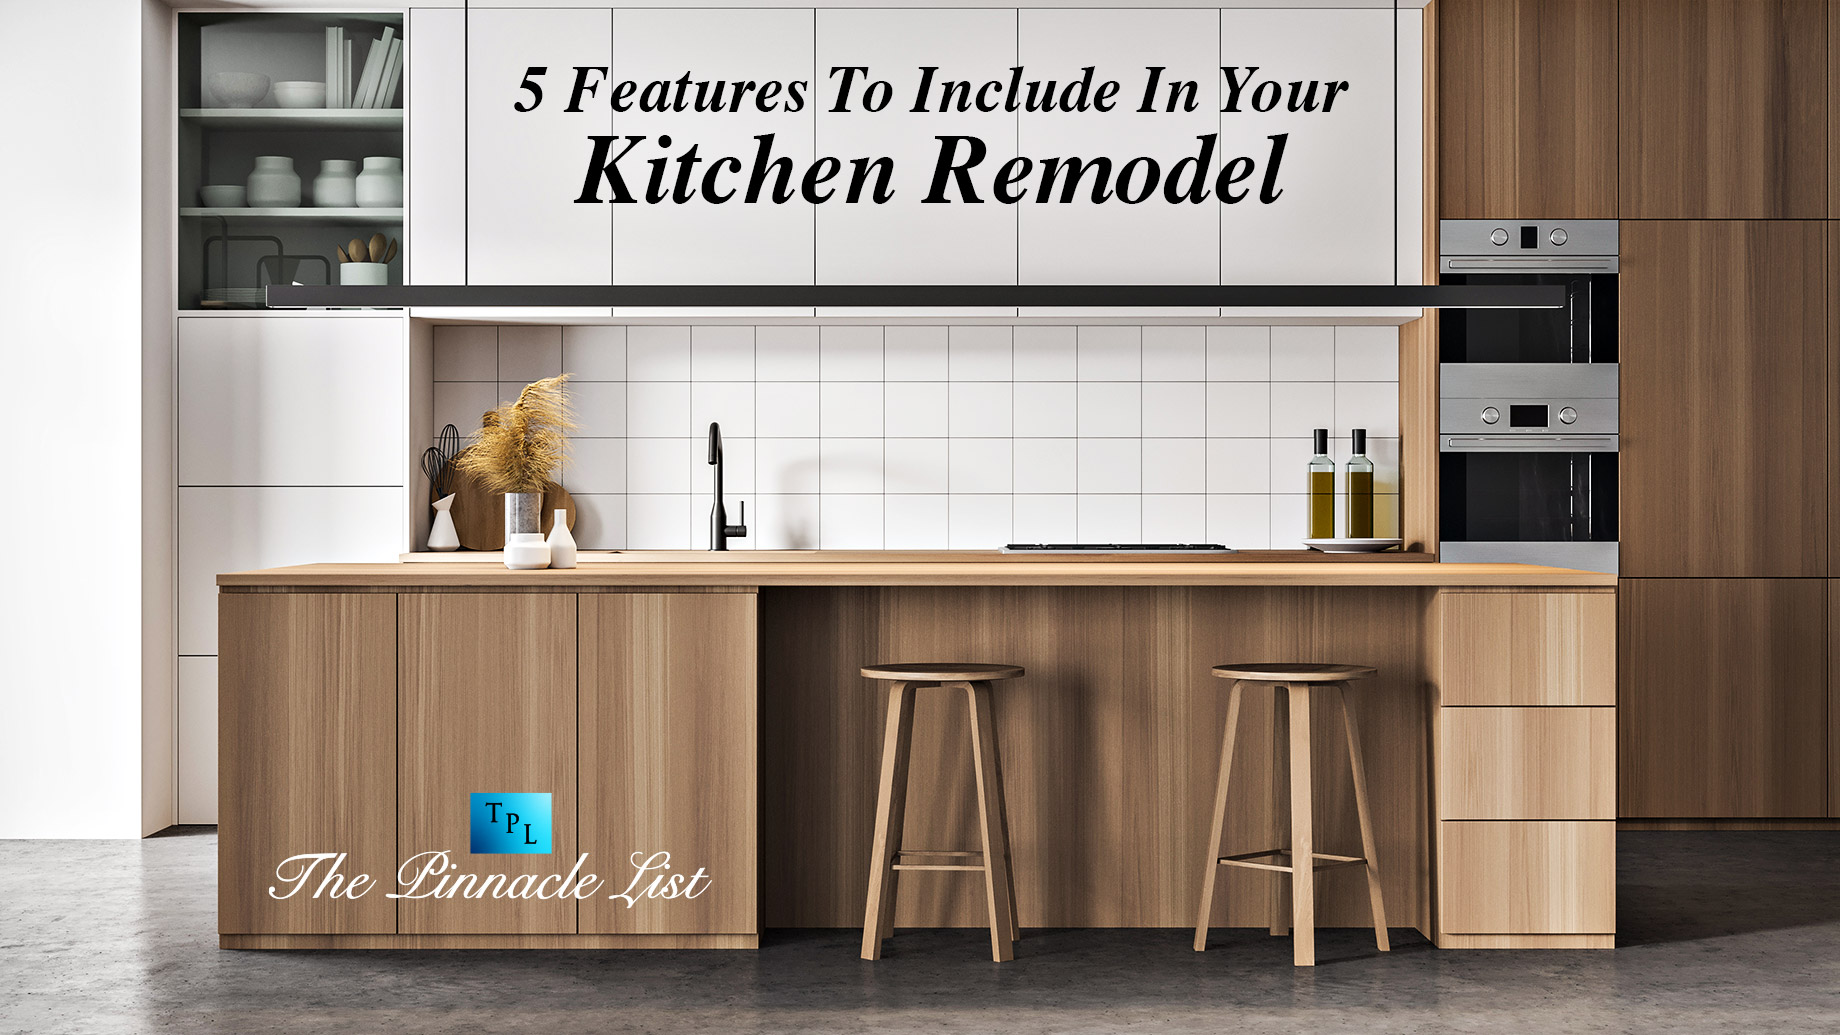 5 Features To Include In Your Kitchen Remodel